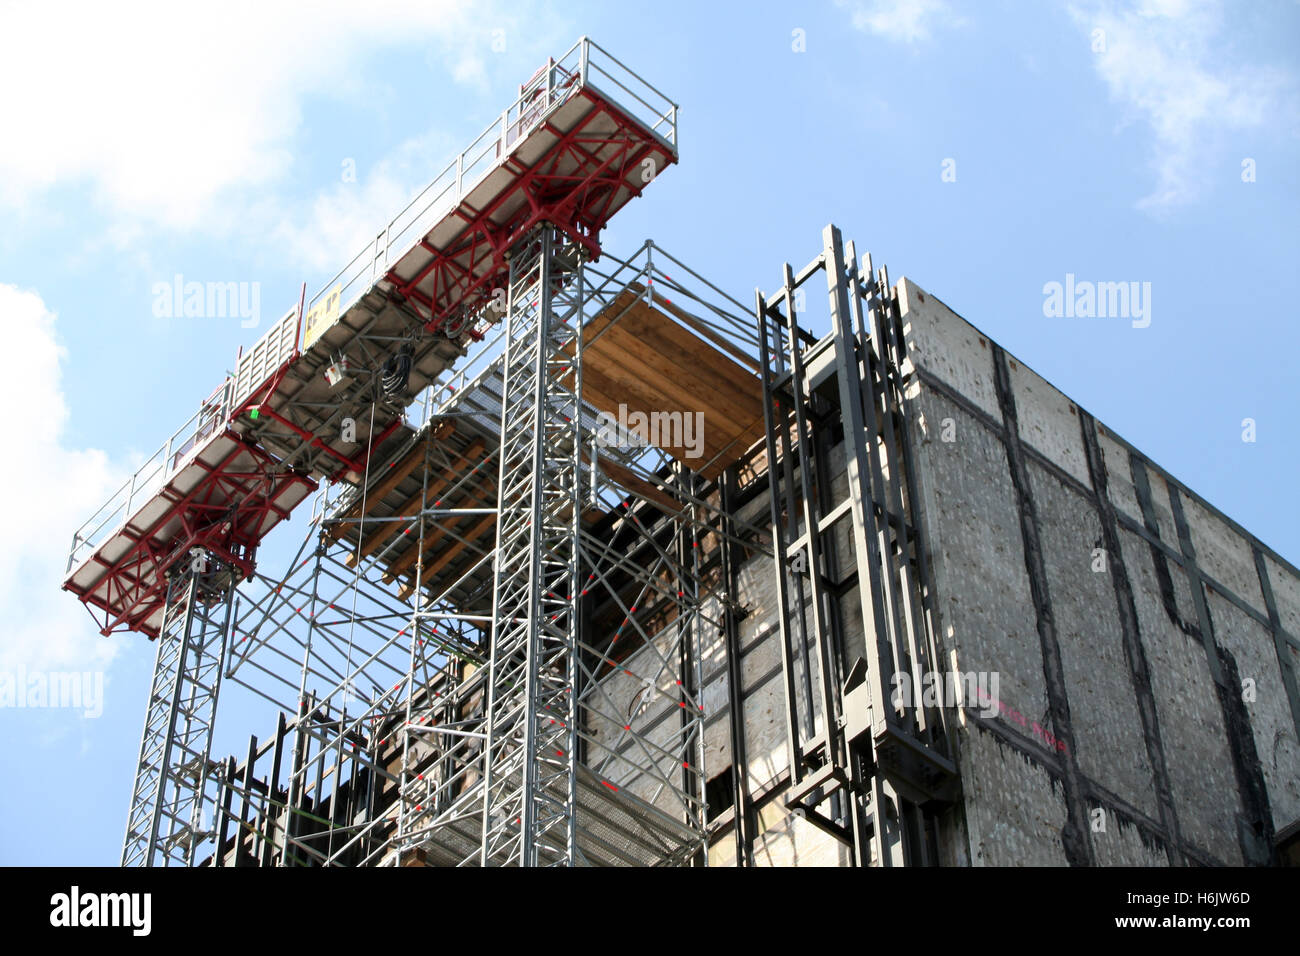 berlin metal aspire dredger scaffold scaffolding that palace construction work republic disassembly disassemble container Stock Photo